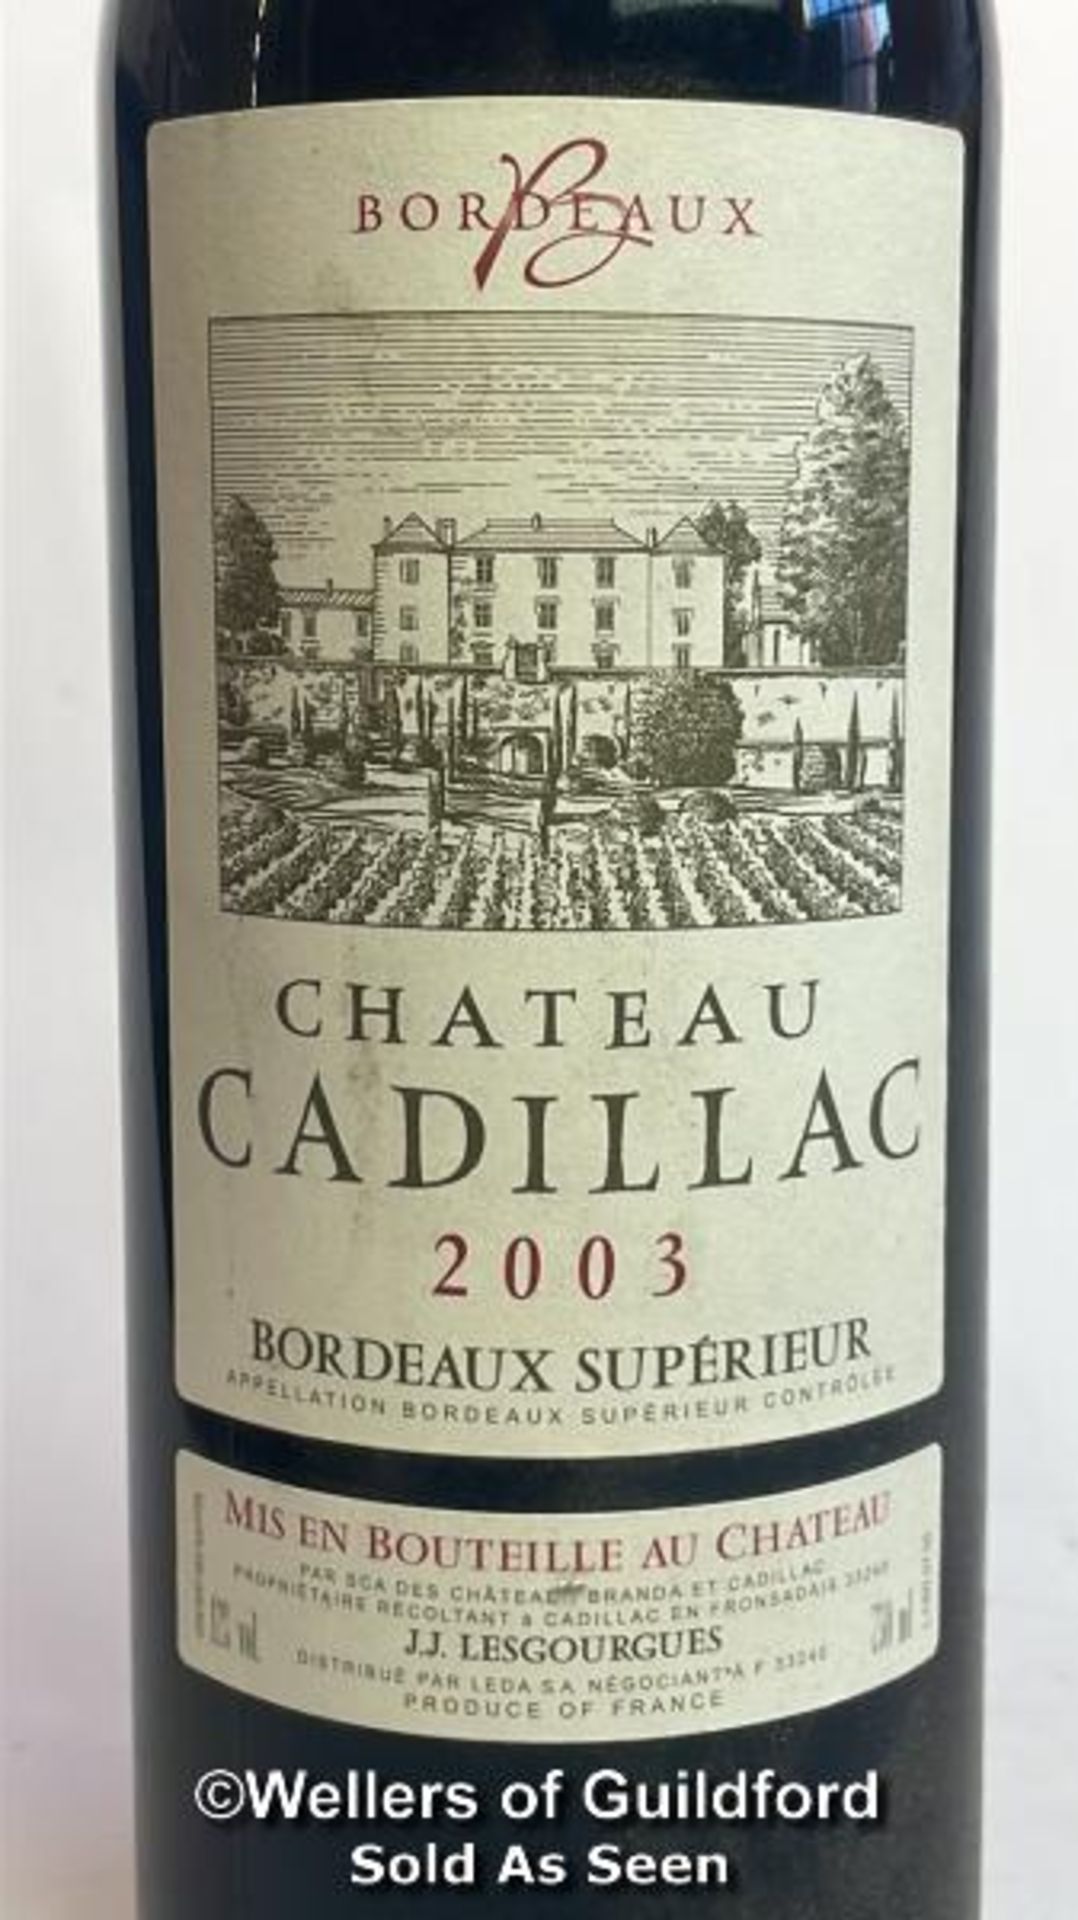 2003 Chateau Cadillac, Bordeaux Superieur, 75cl, 12% vol / Please see images for fill level and - Image 2 of 6